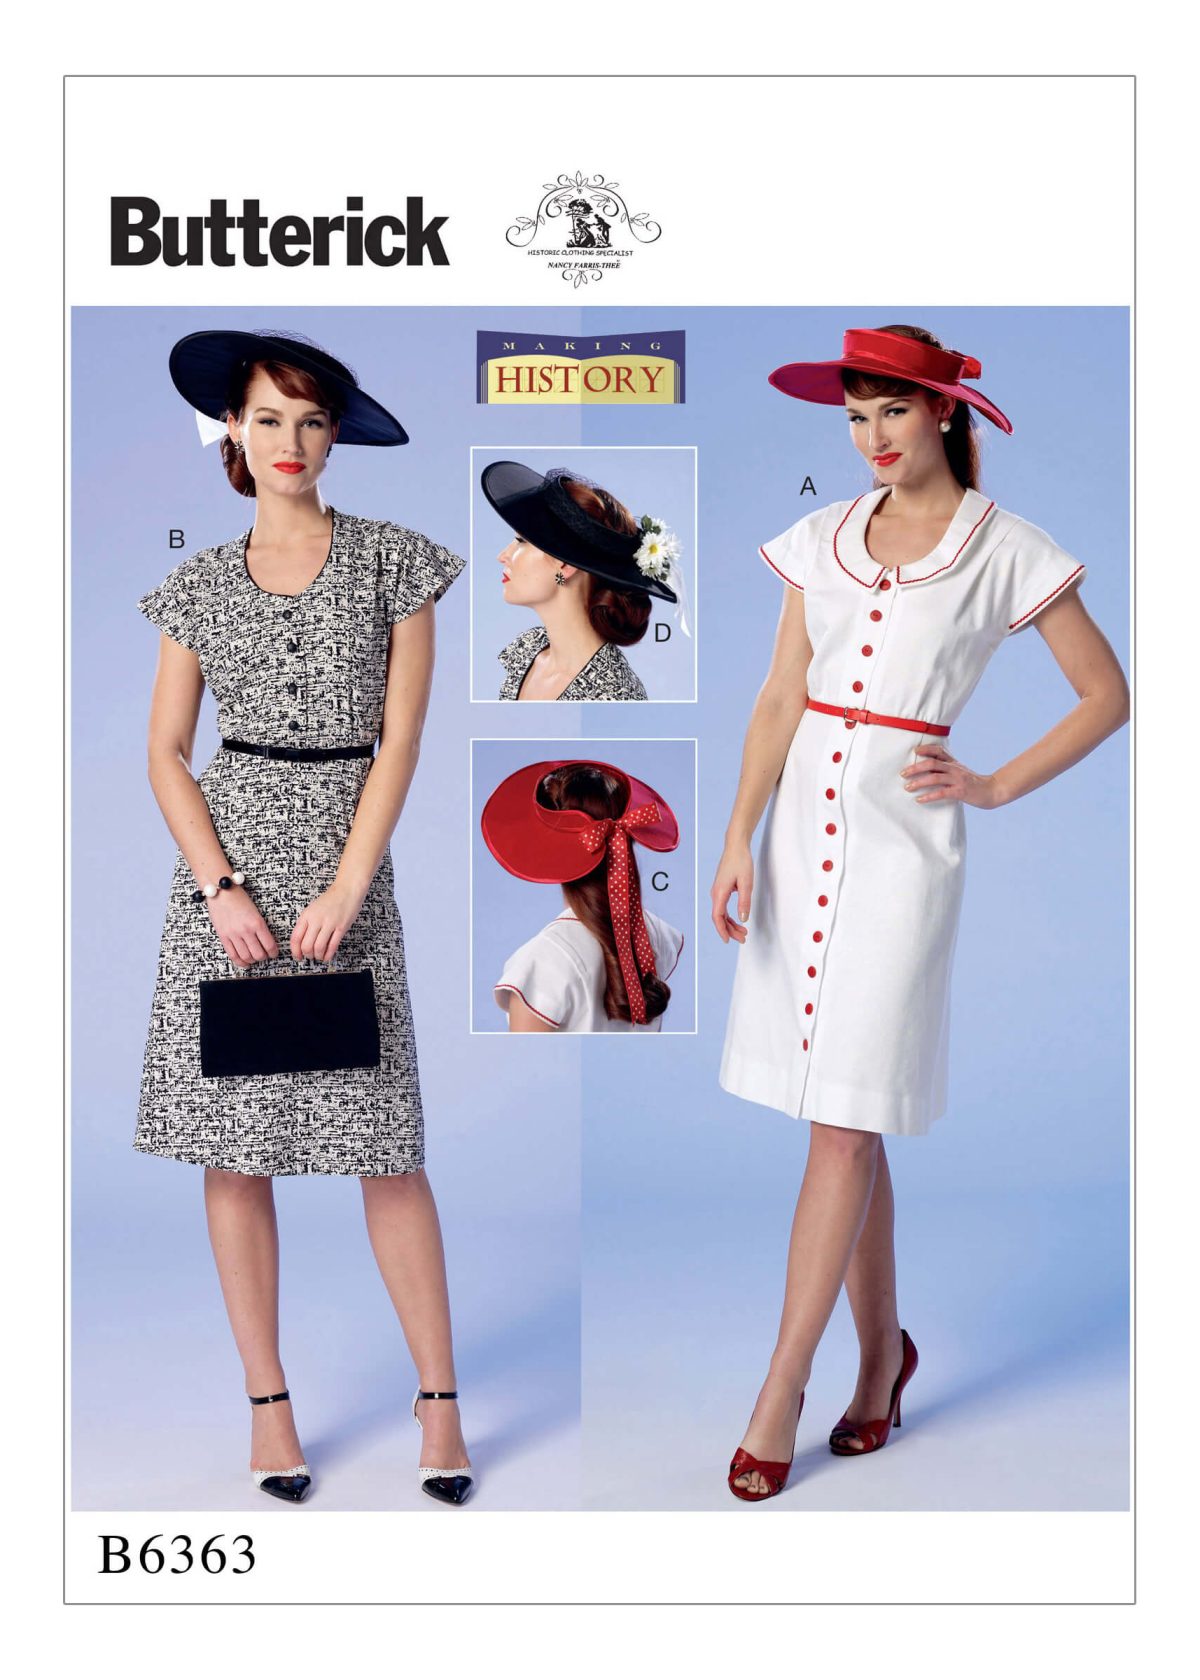 Butterick Sewing Pattern B6363 Misses' Button-Front, Flutter Sleeve Dresses and Sun Hat